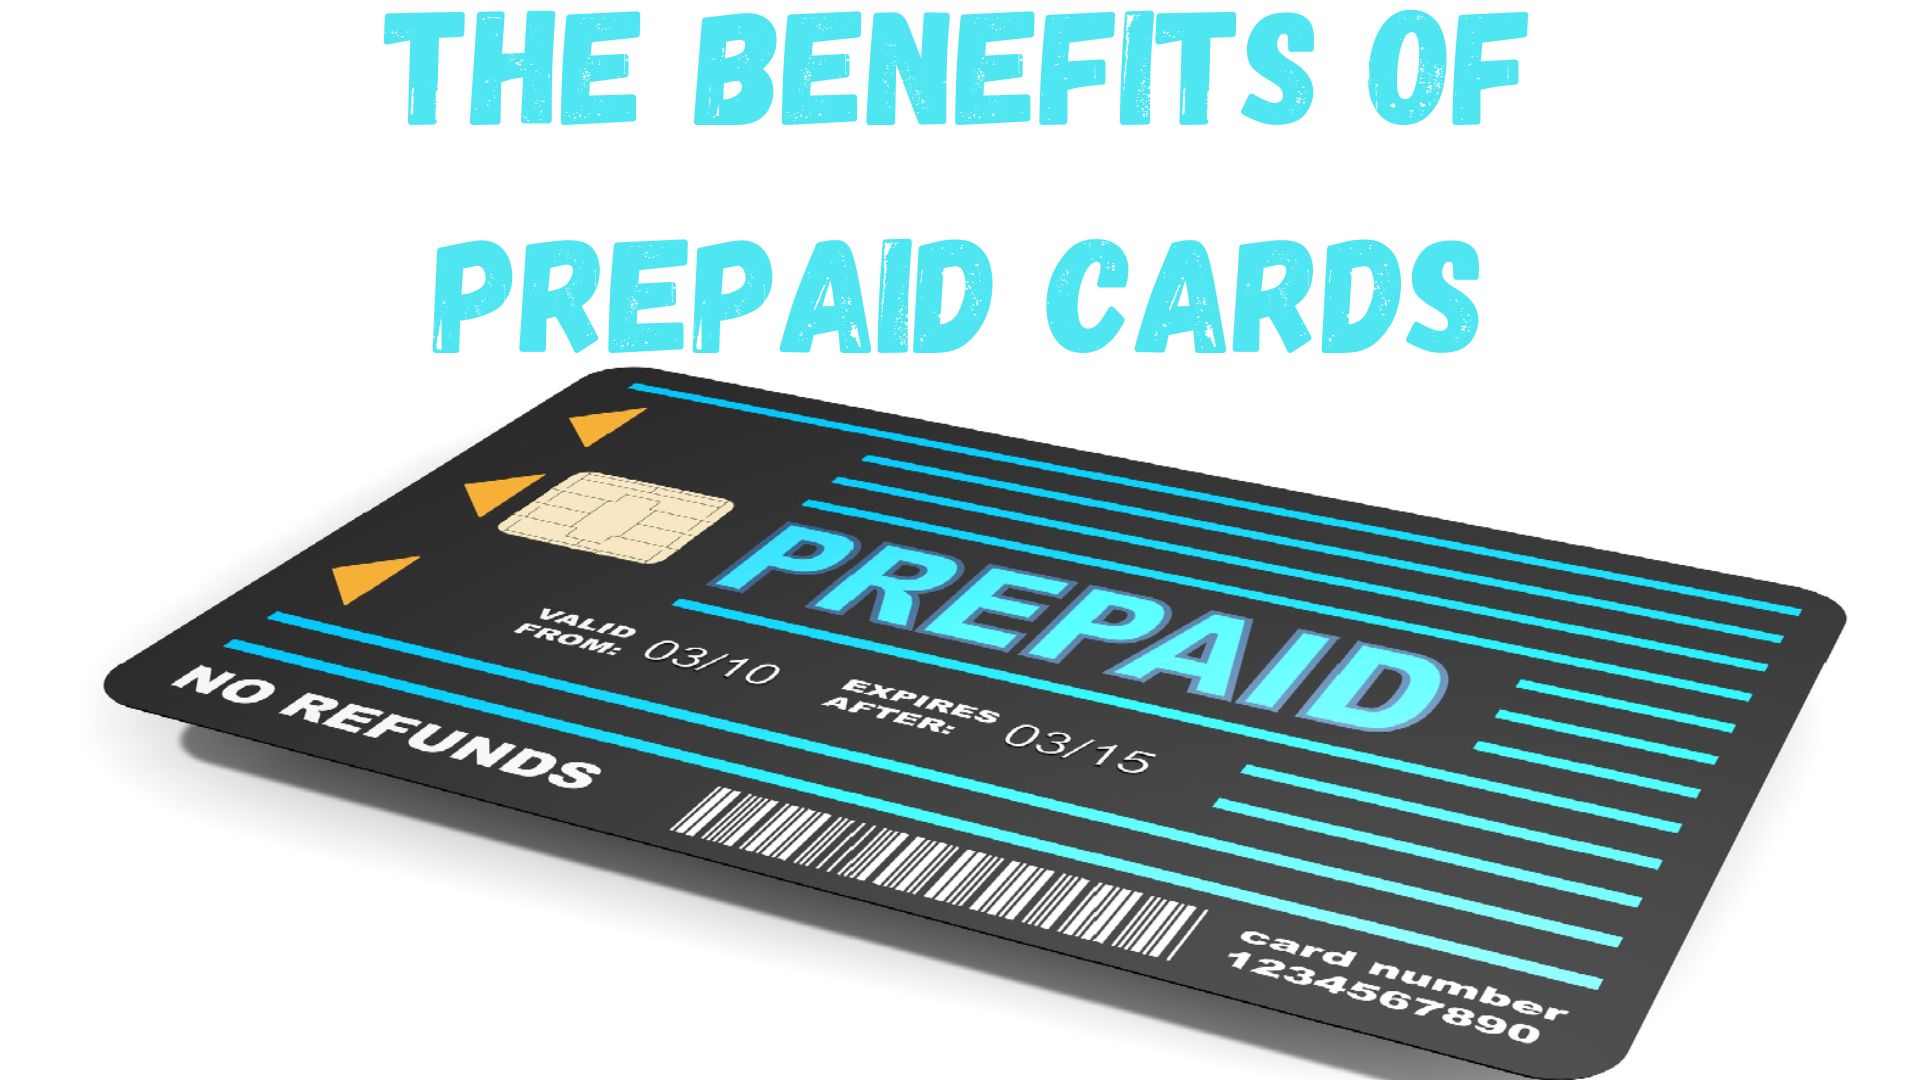 The Benefits of Prepaid Cards